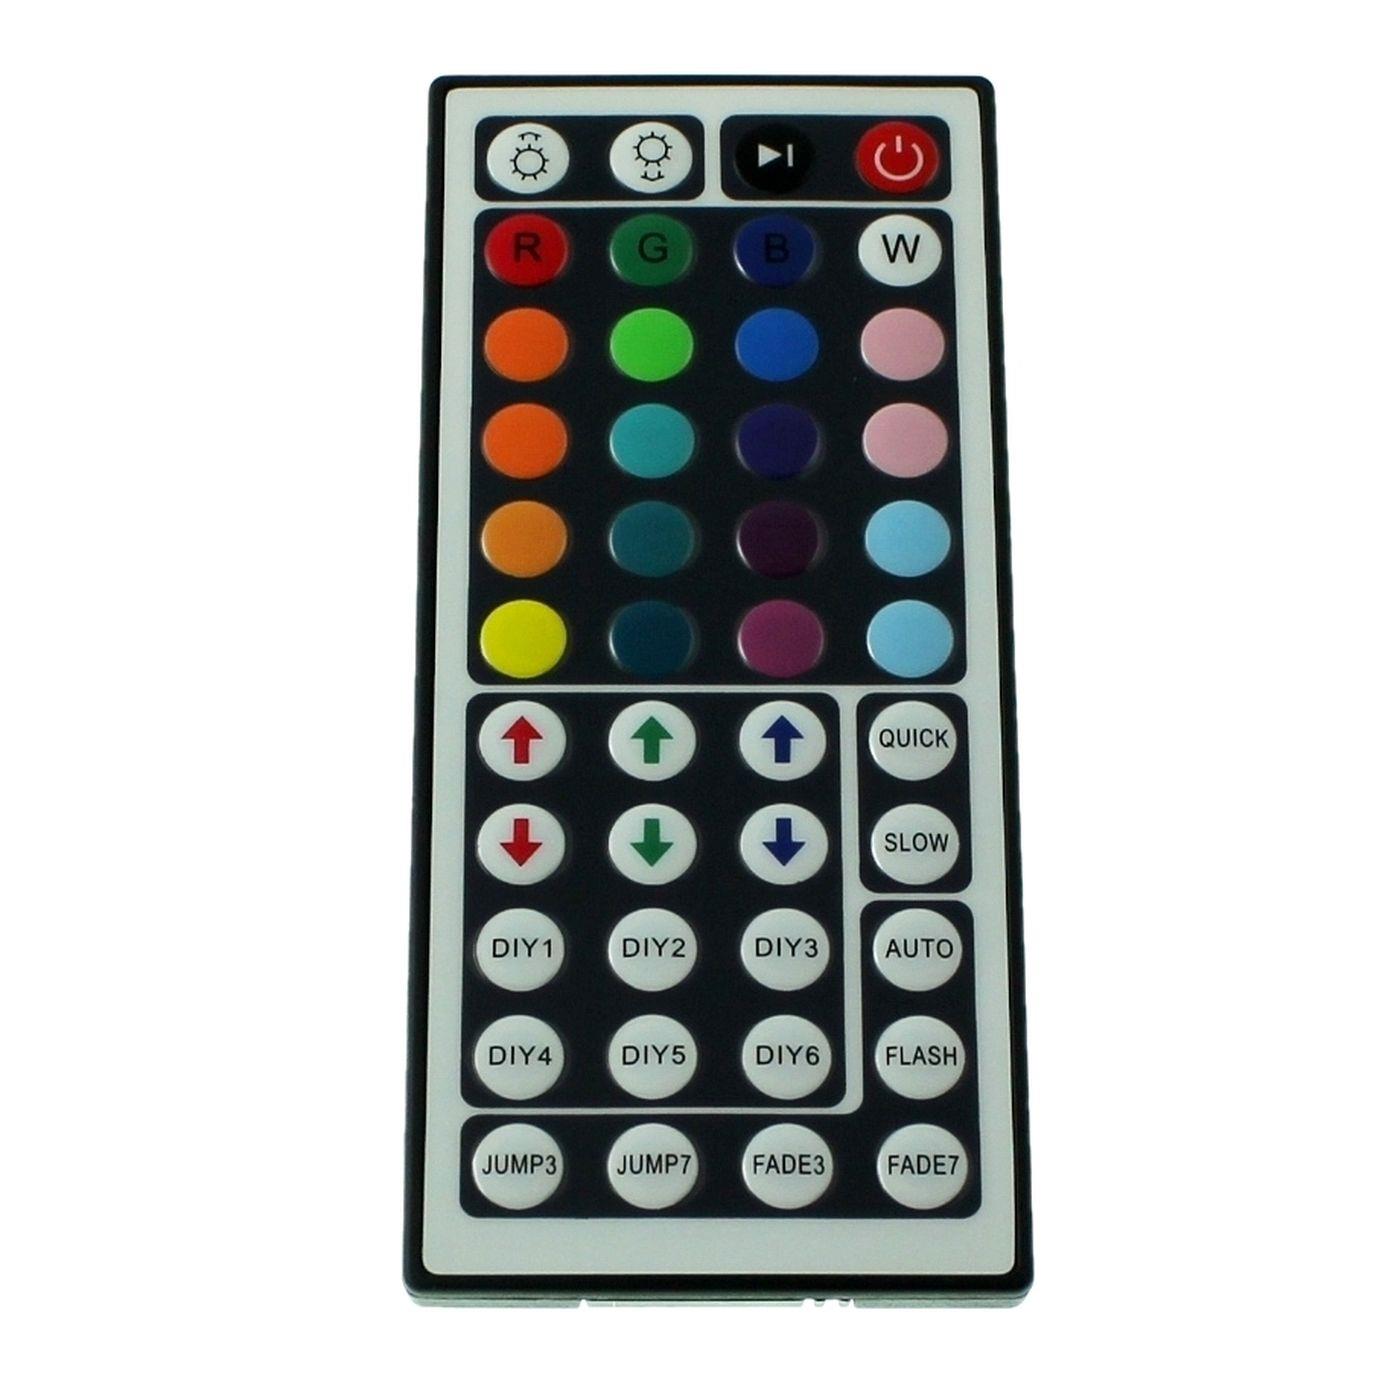 RGB LED 44Key Controller 12...24V 144W for colour changing strips 4-Pin